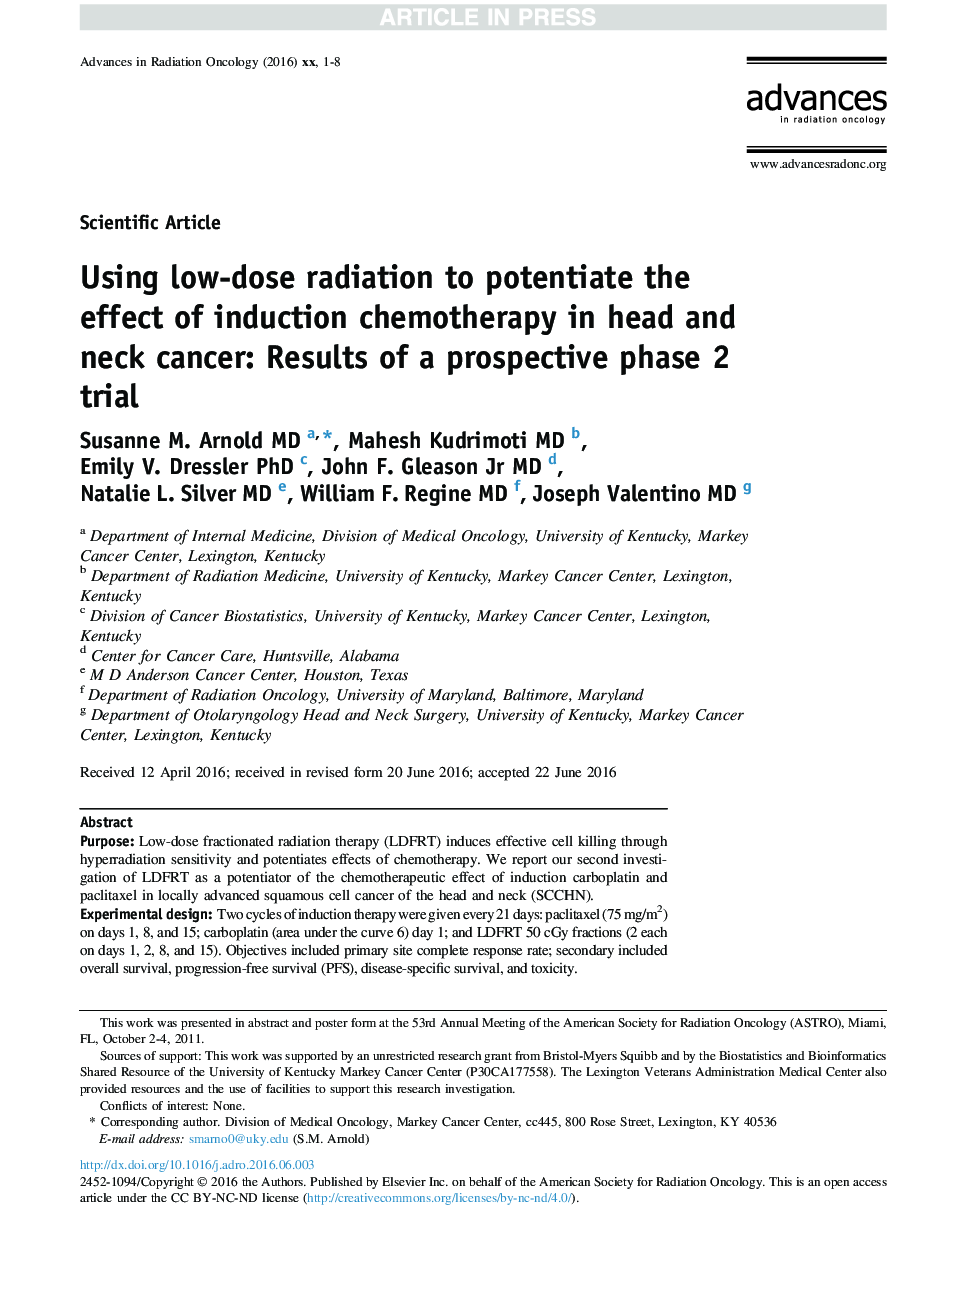 Using low-dose radiation to potentiate the effect of induction chemotherapy in head and neck cancer: Results of a prospective phase 2 trial